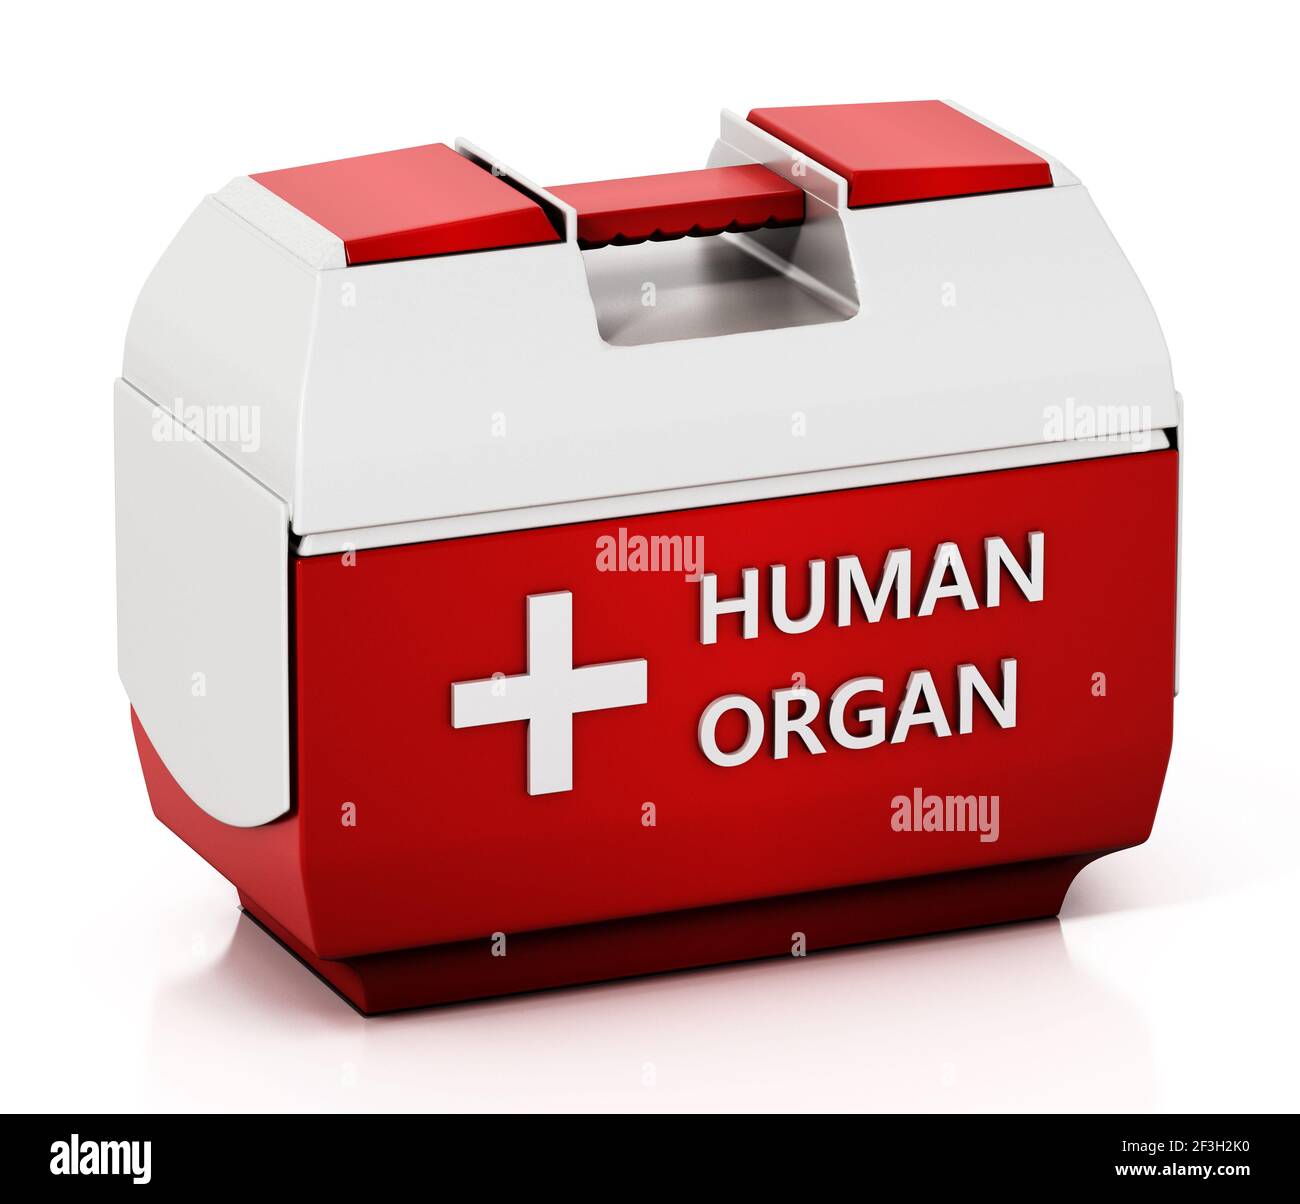 Organ Transport Box High Resolution Stock Photography and Images - Alamy